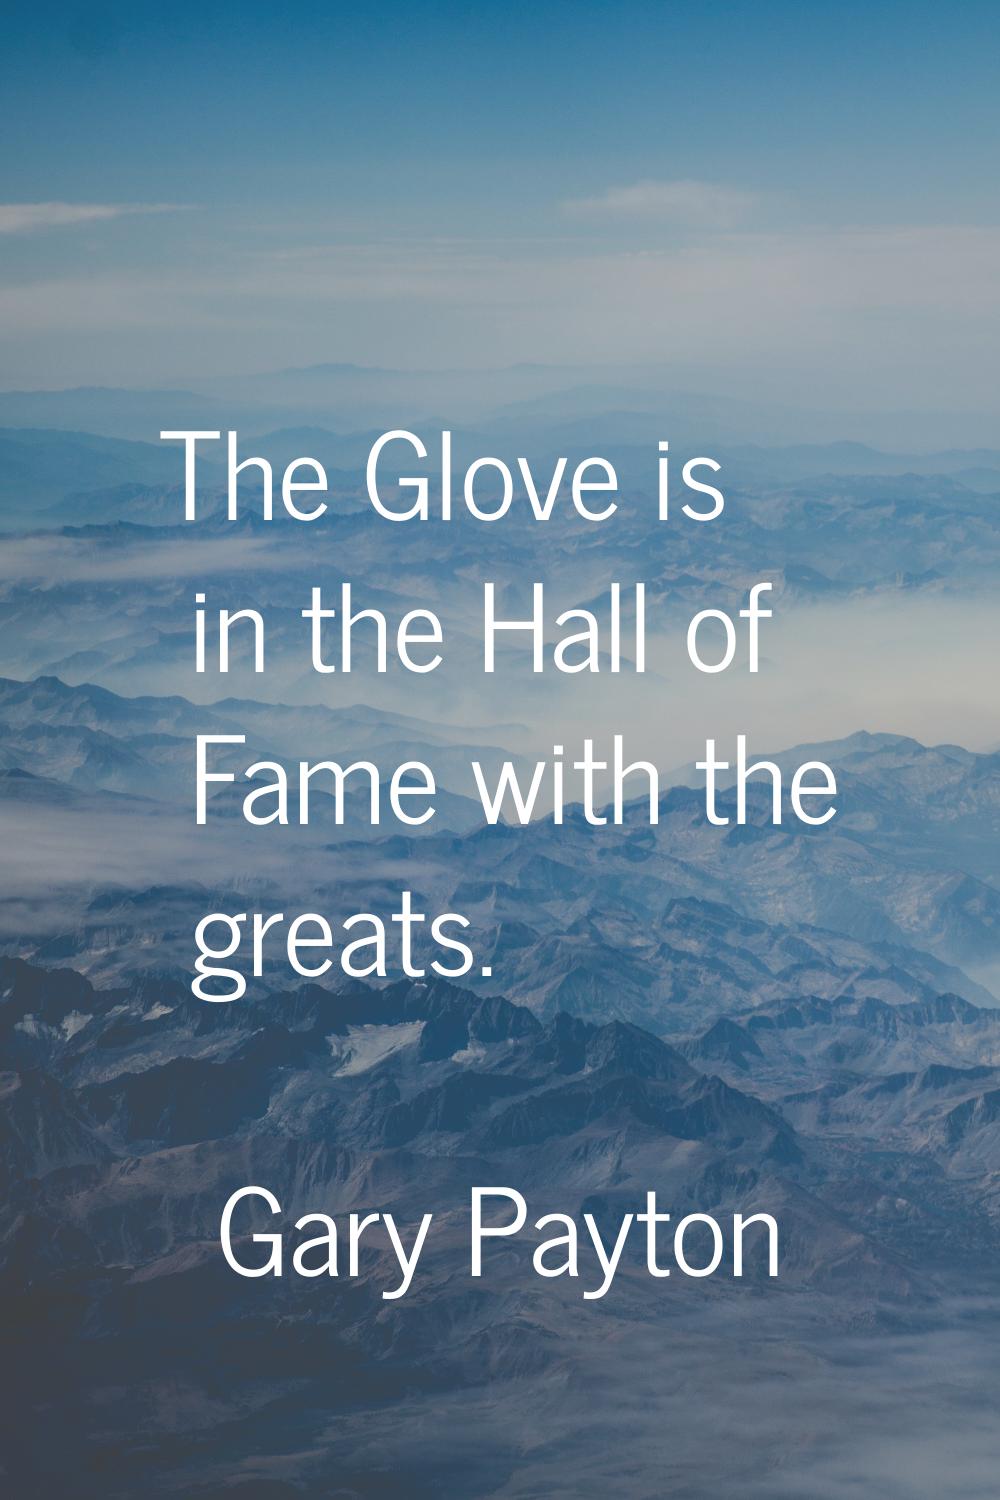 The Glove is in the Hall of Fame with the greats.